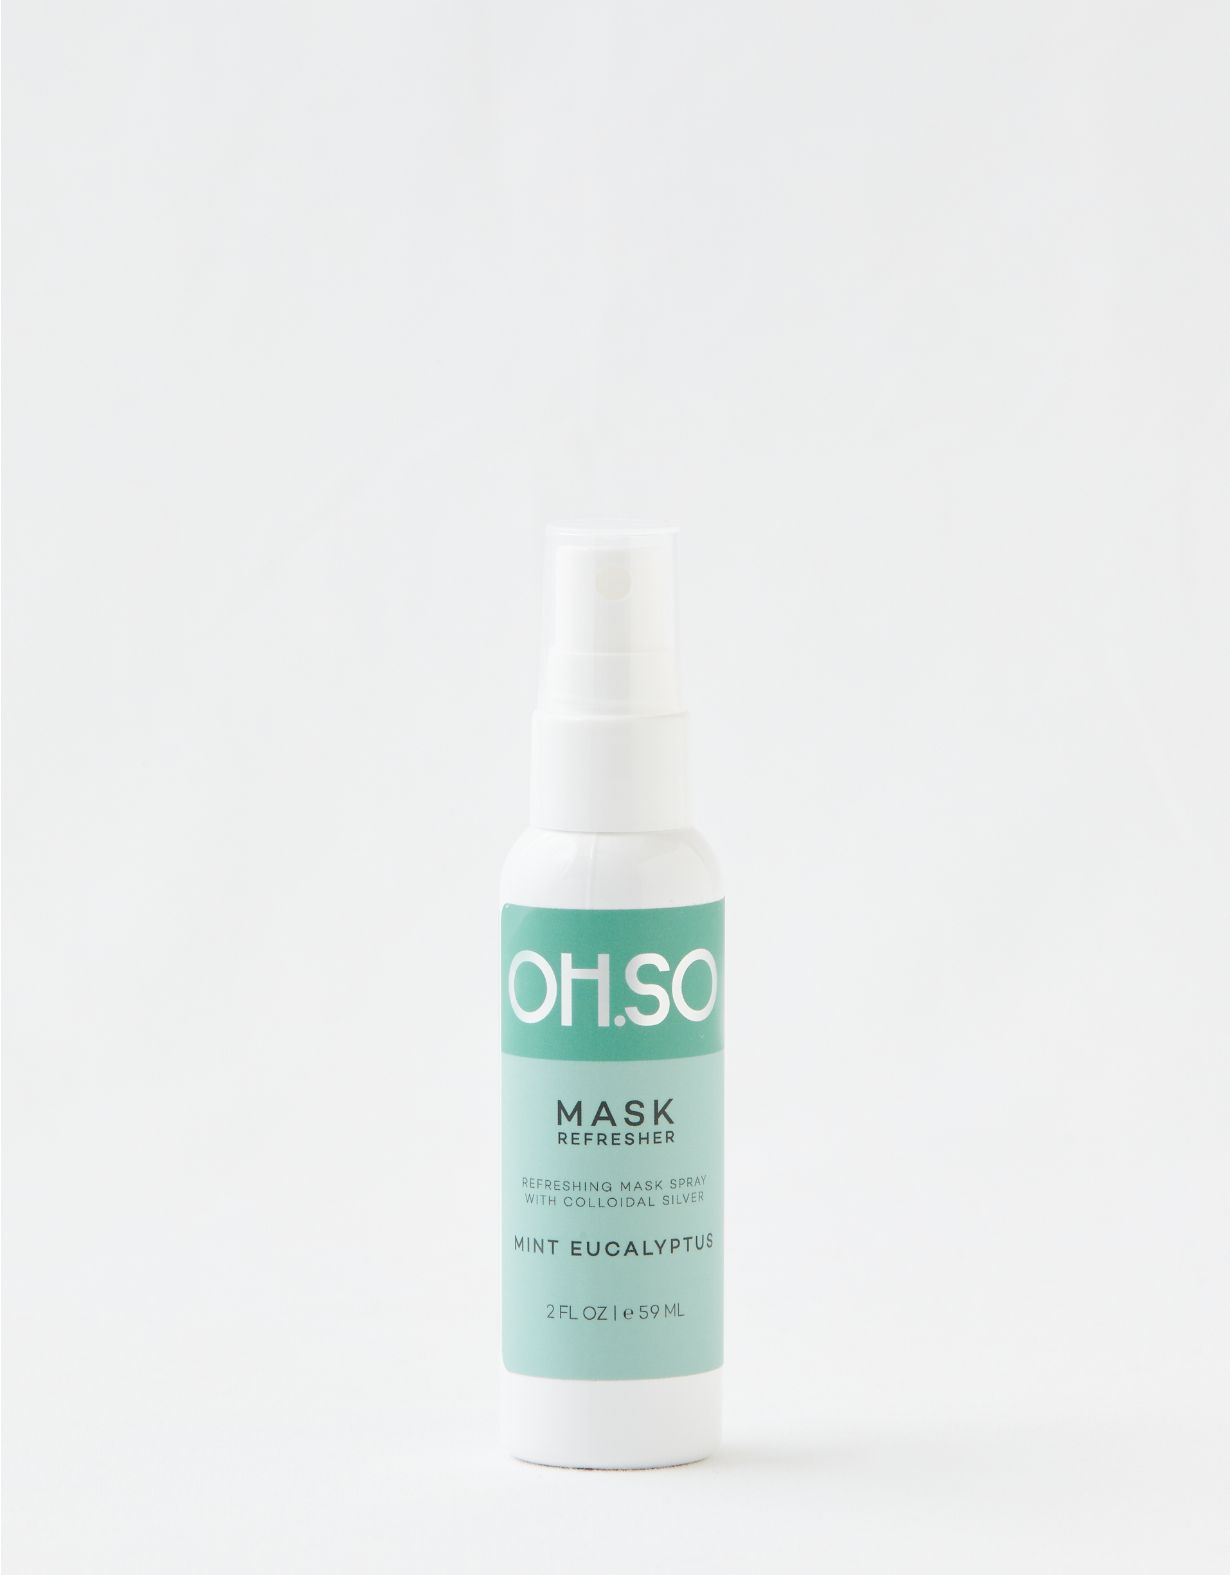 OH.SO Mask Refresher